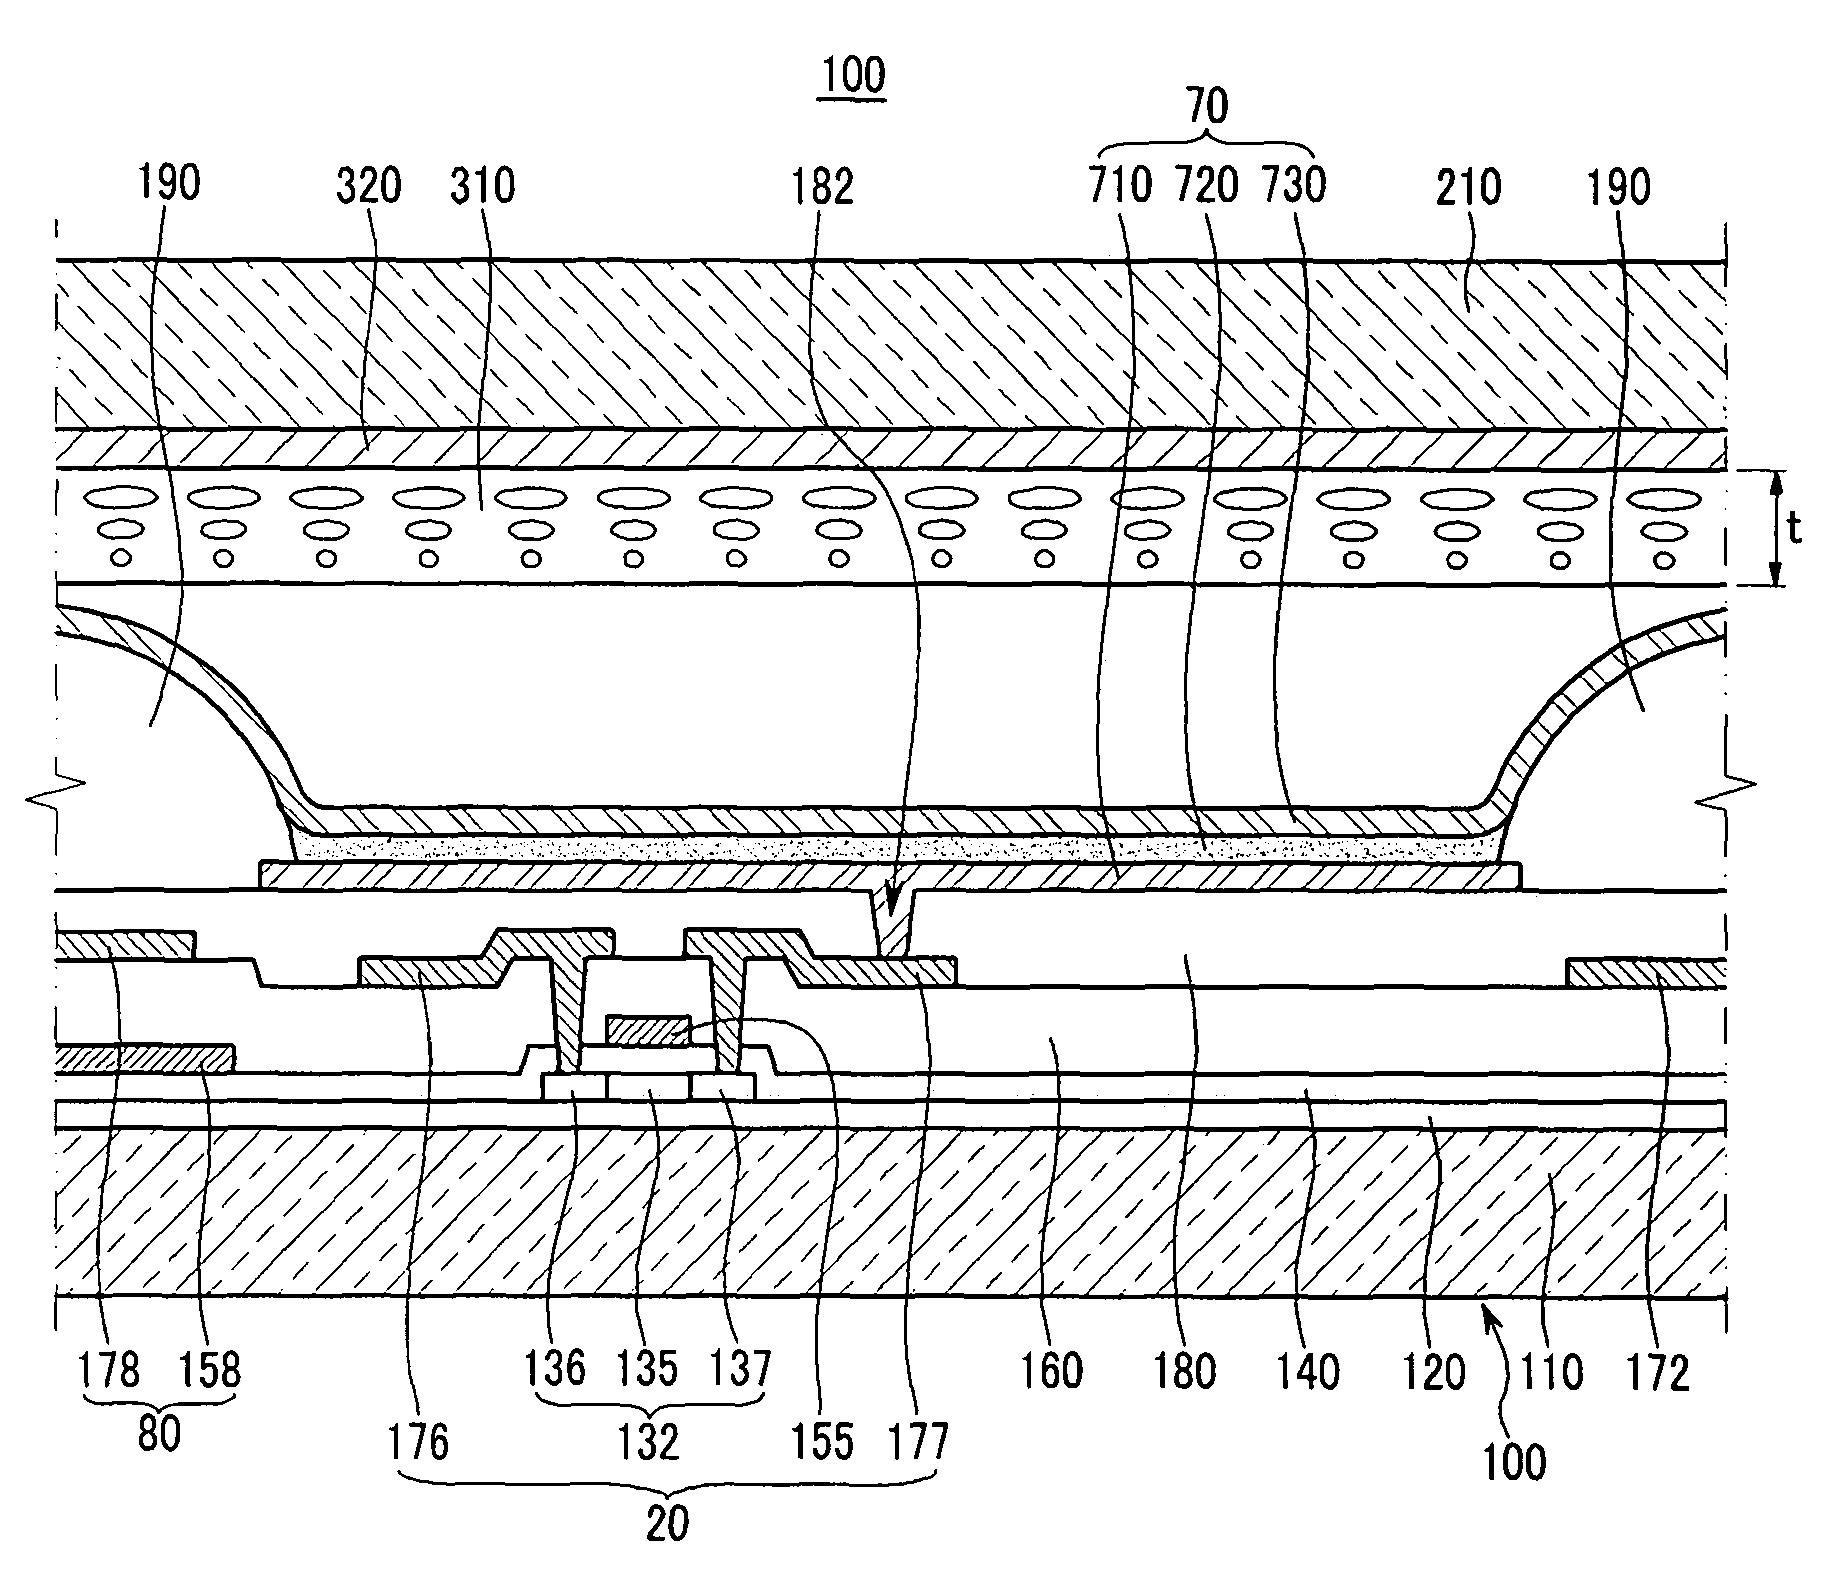 Organic light emitting diode display, display device including the same, and associated methods